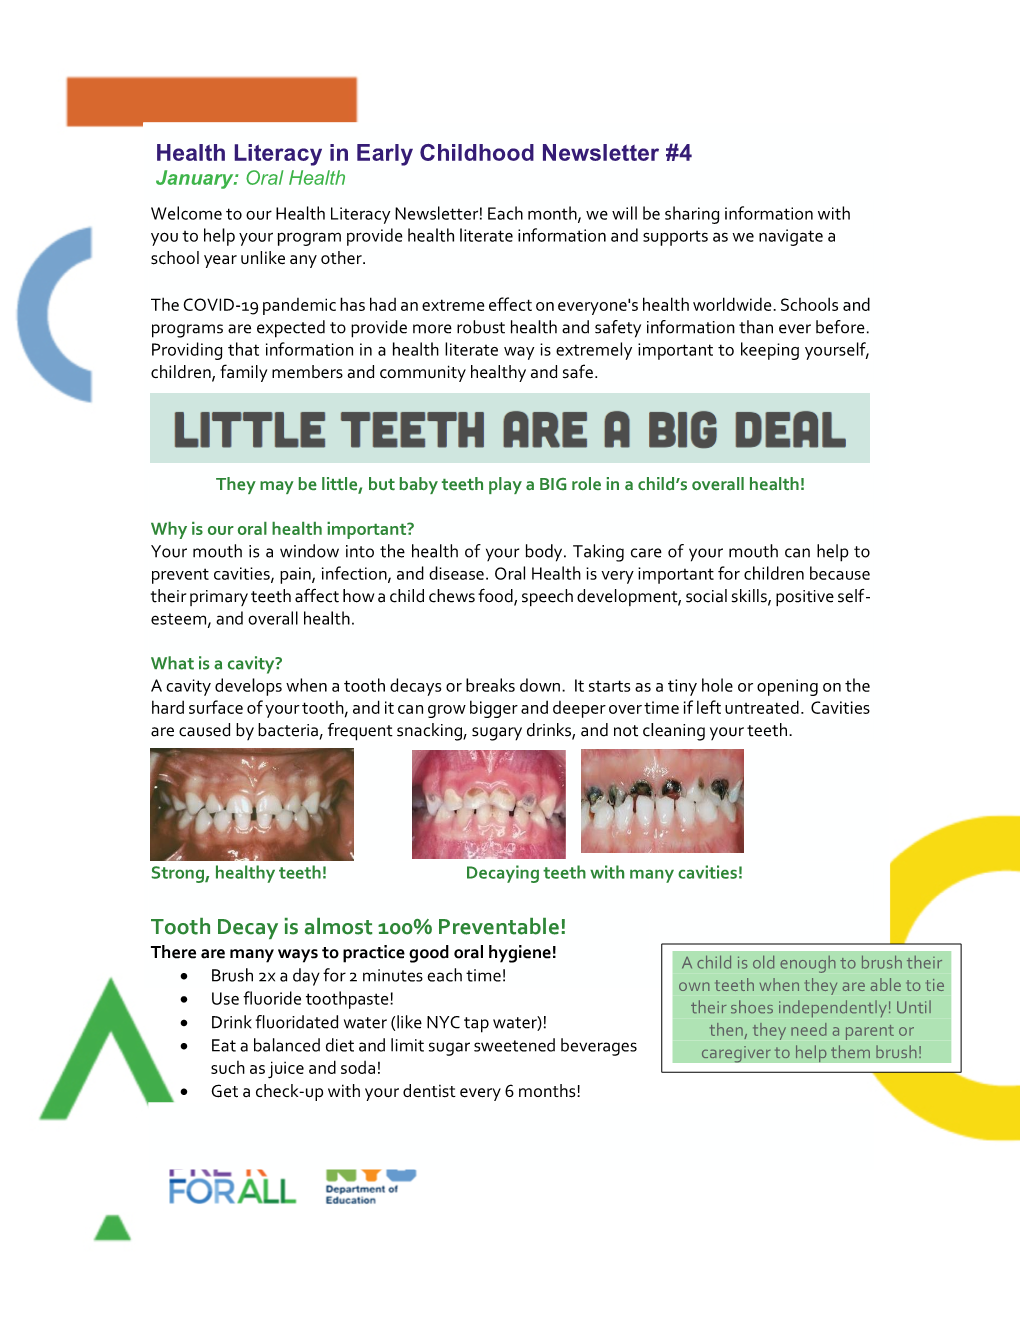 Tooth Decay Is Almost 100% Preventable! Health Literacy in Early Childhood Newsletter #4